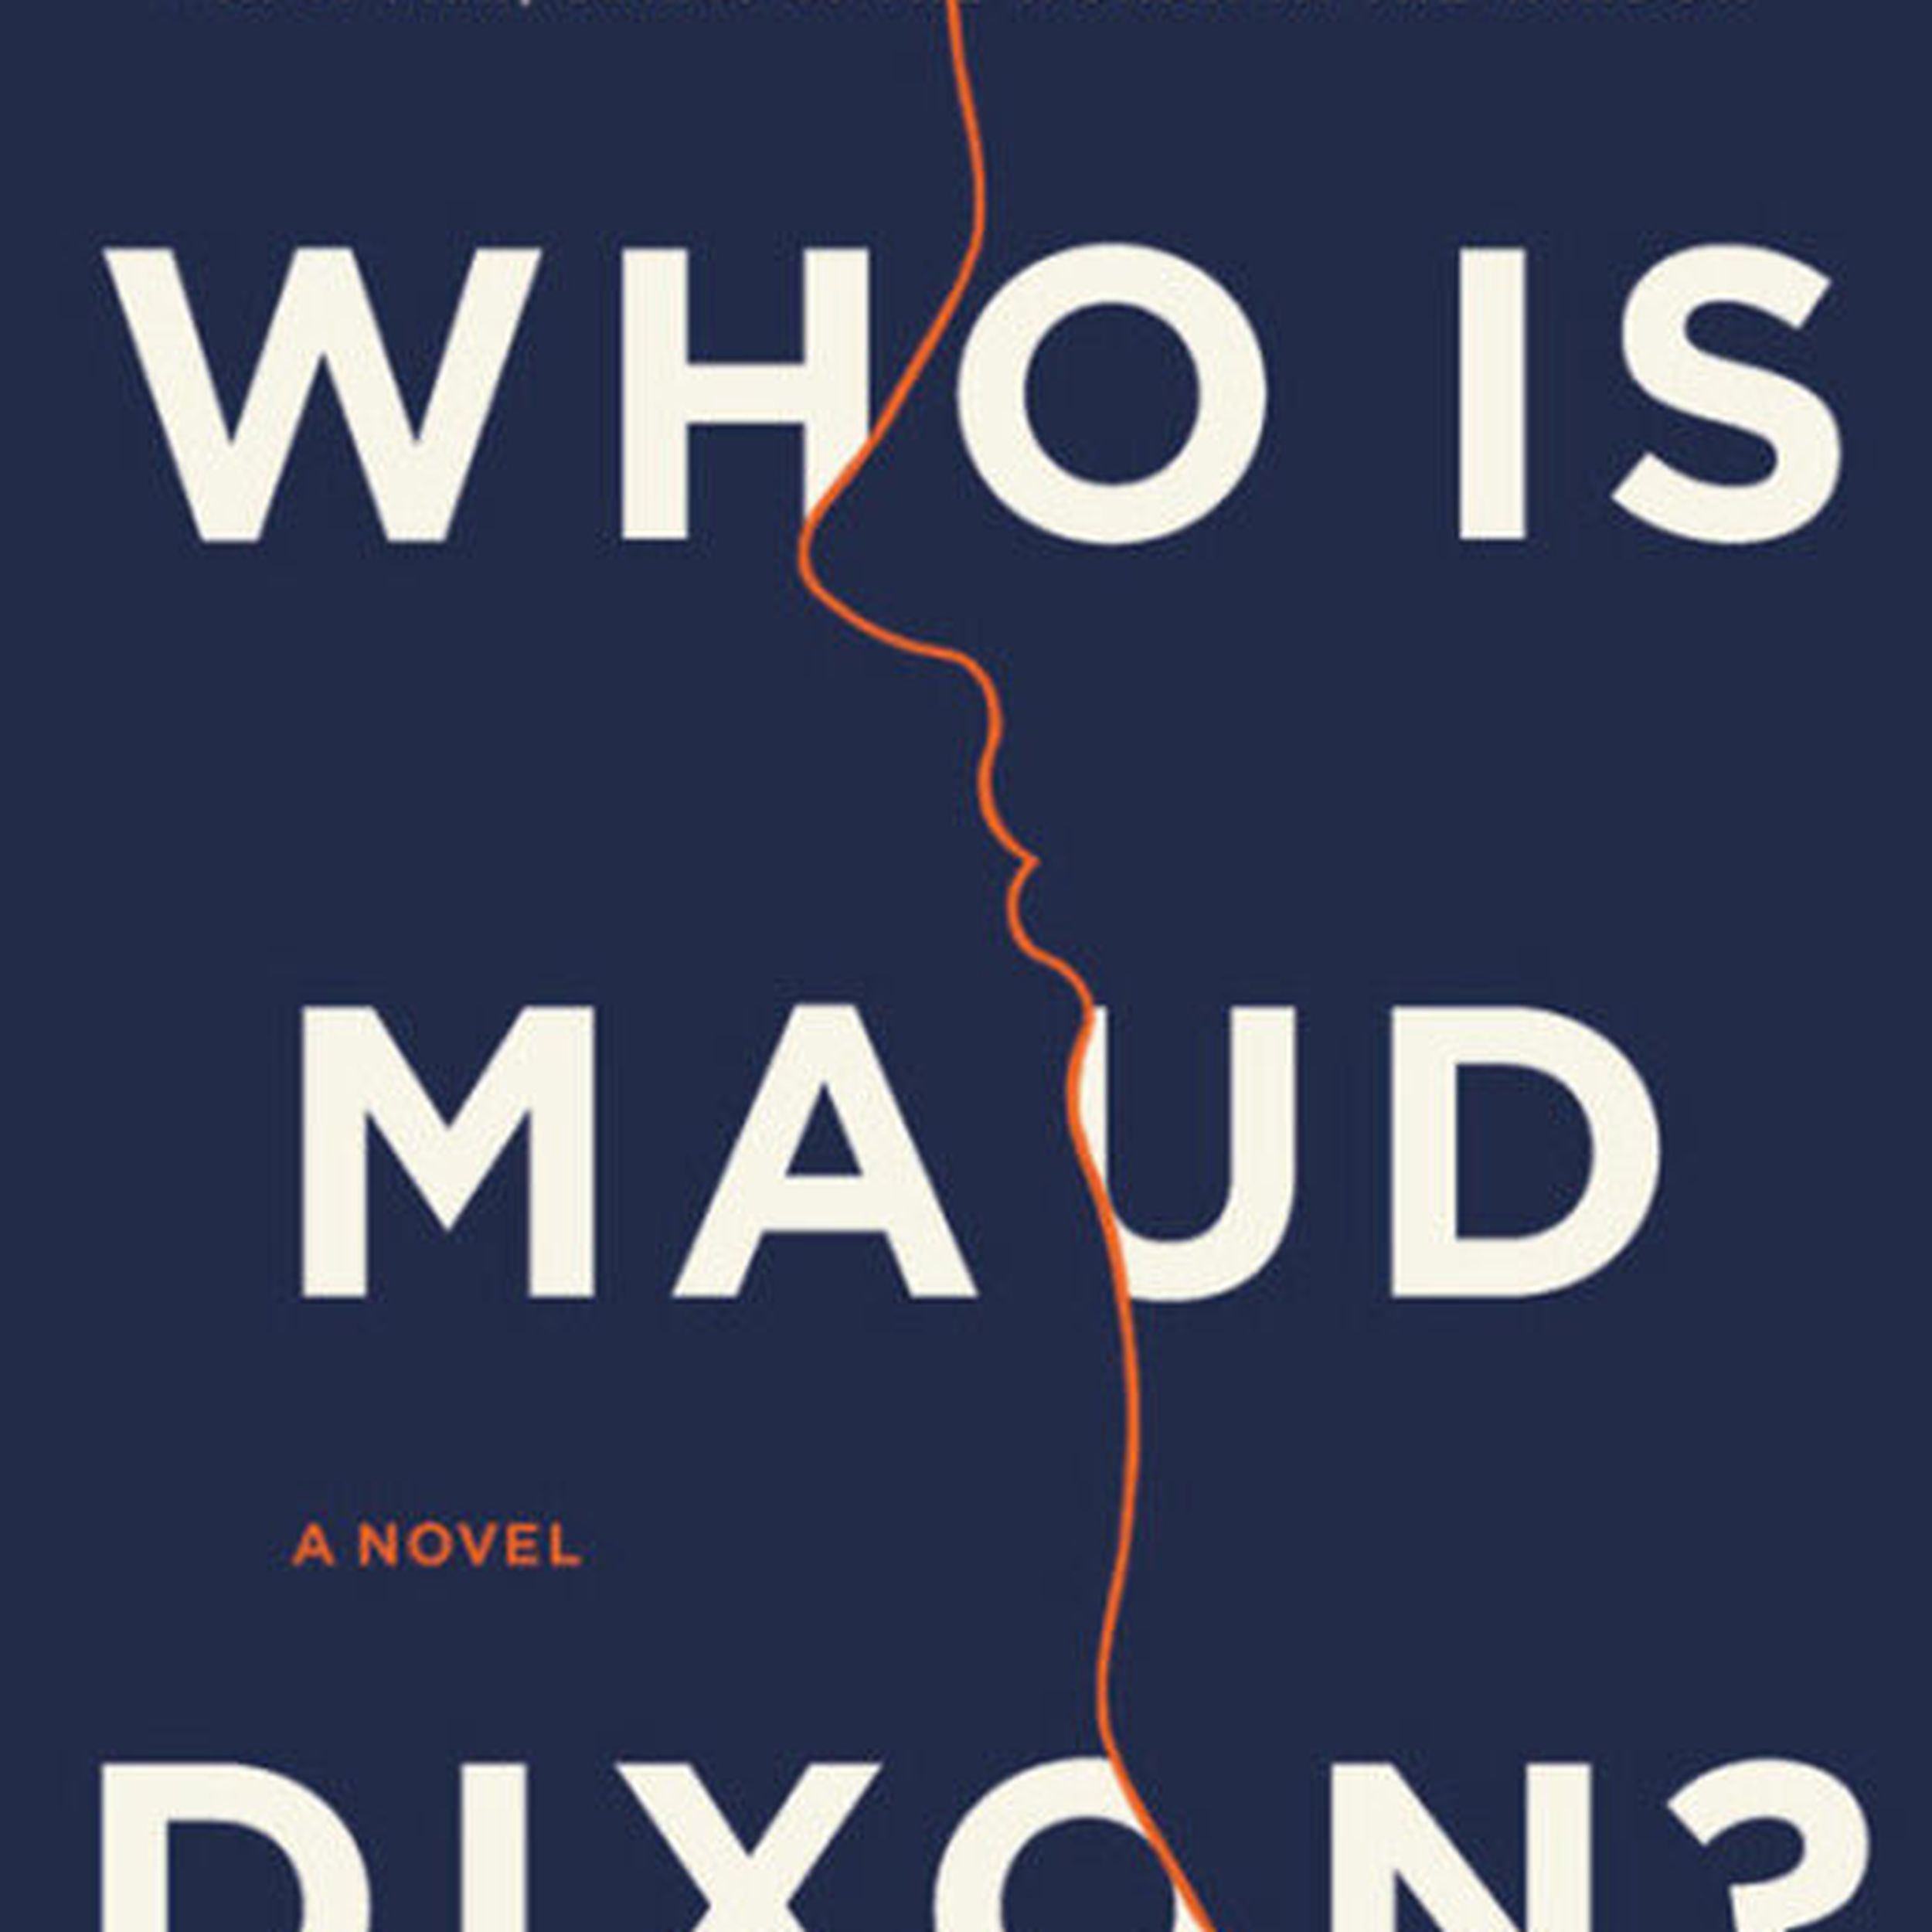 Book Review: 'Who Is Maud Dixon,' by Alexandra Andrews - The New